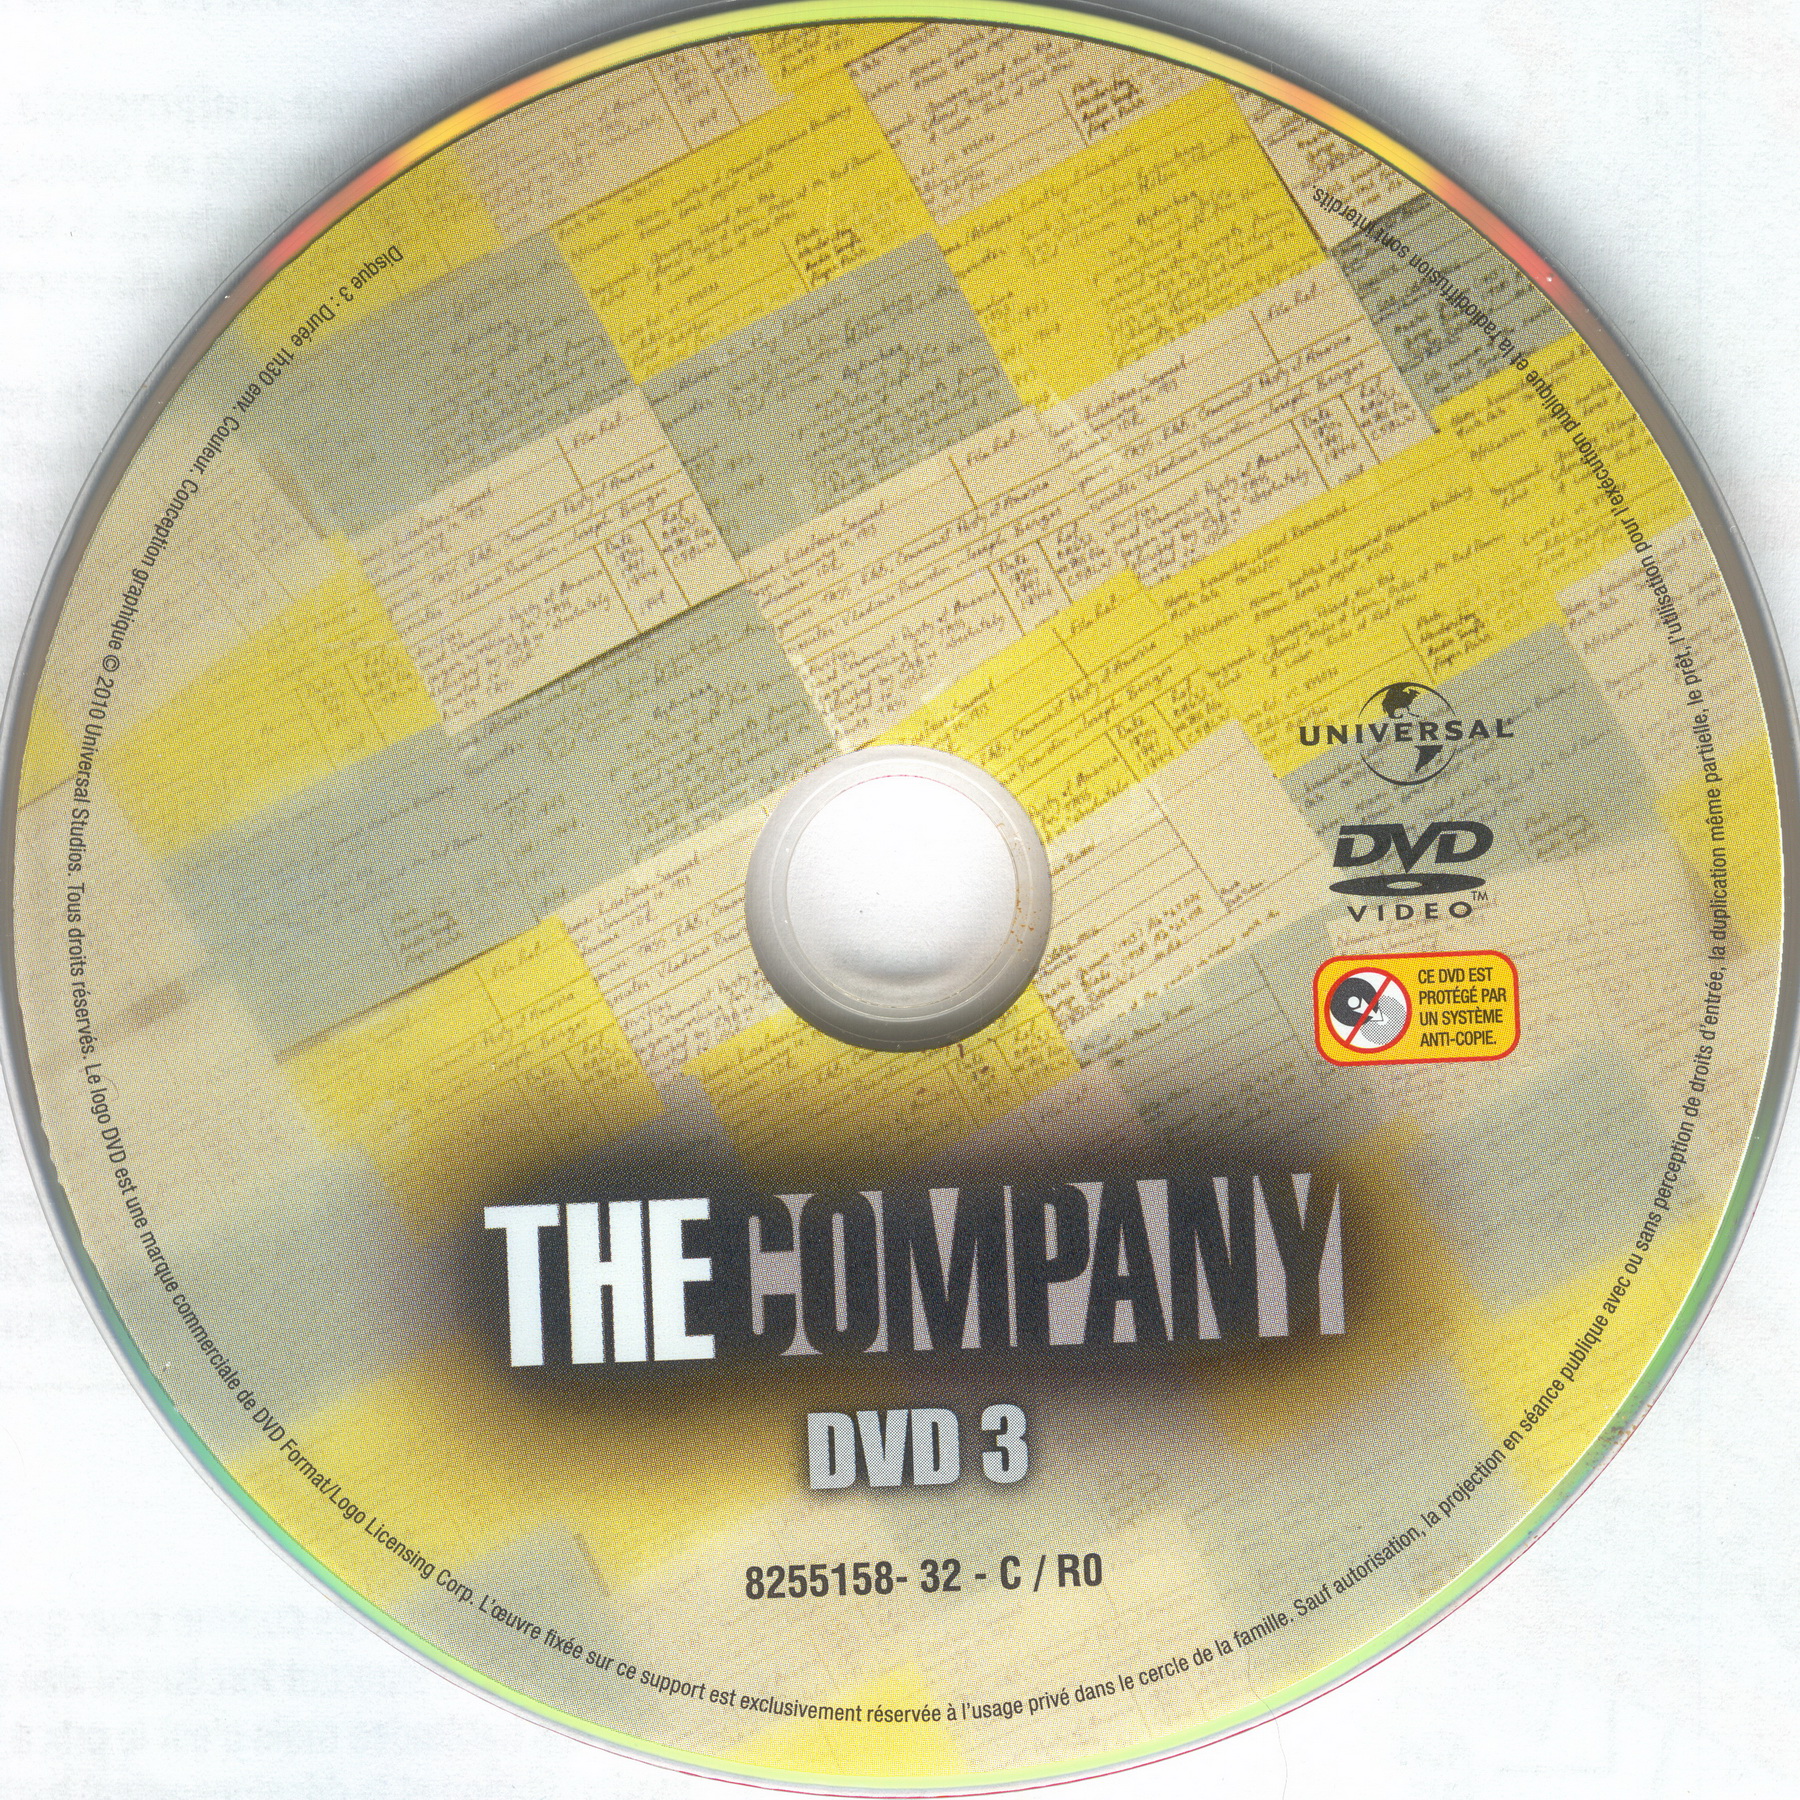 The company DISC 3